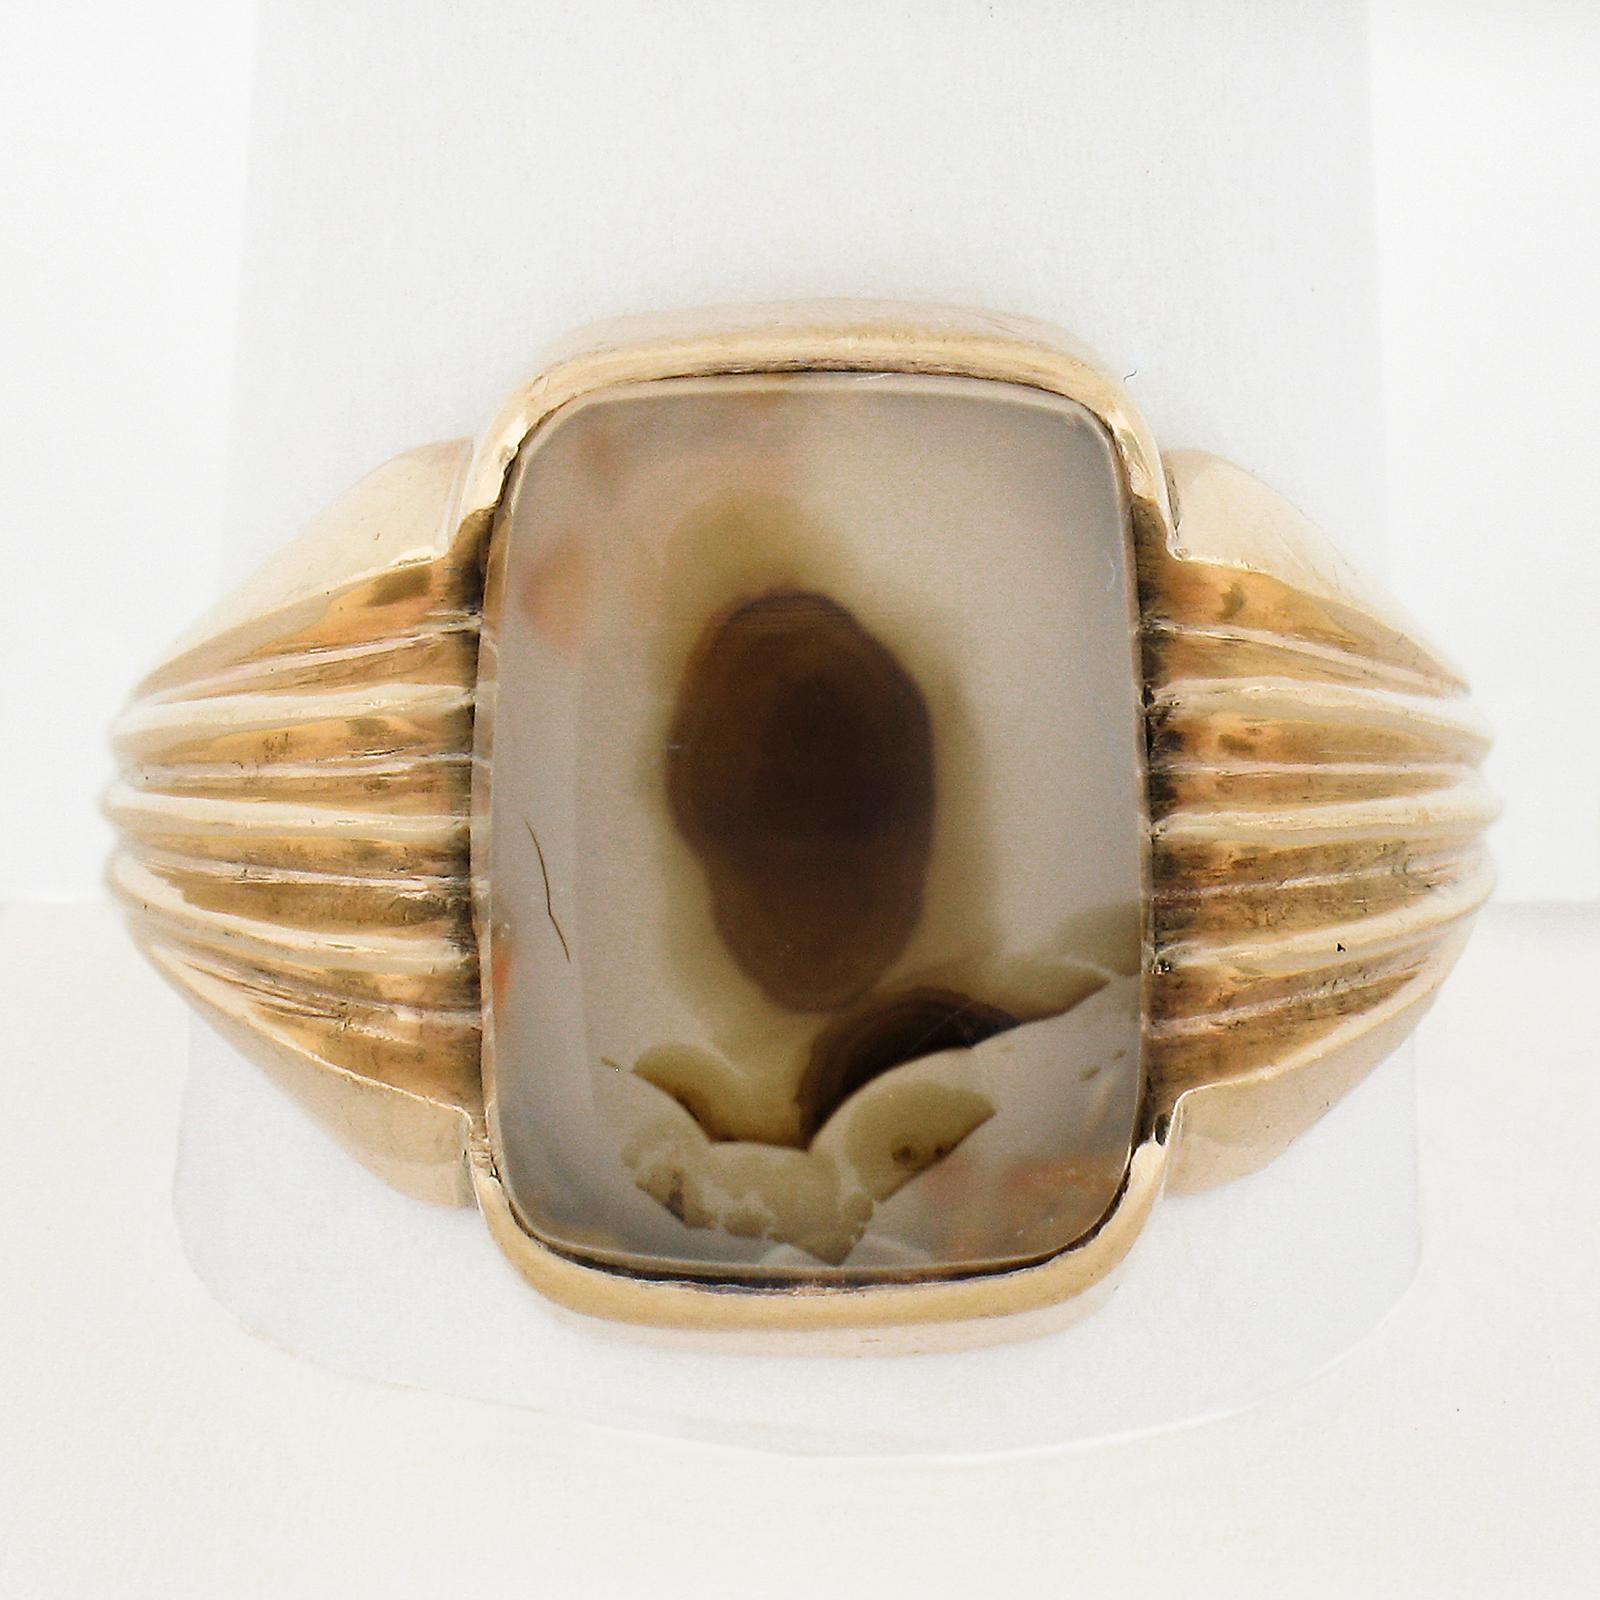 --Stone(s):--
(1) Natural Genuine Moss Agate - Rectangular Cut - Channel Set - Transparent with Brown Color - 14.3x10.5mm (approx.)

Material: Solid 10k Rosy Yellow Gold
Weight: 8.58 Grams
Ring Size: 11 (Fitted on a finger. We can custom size this